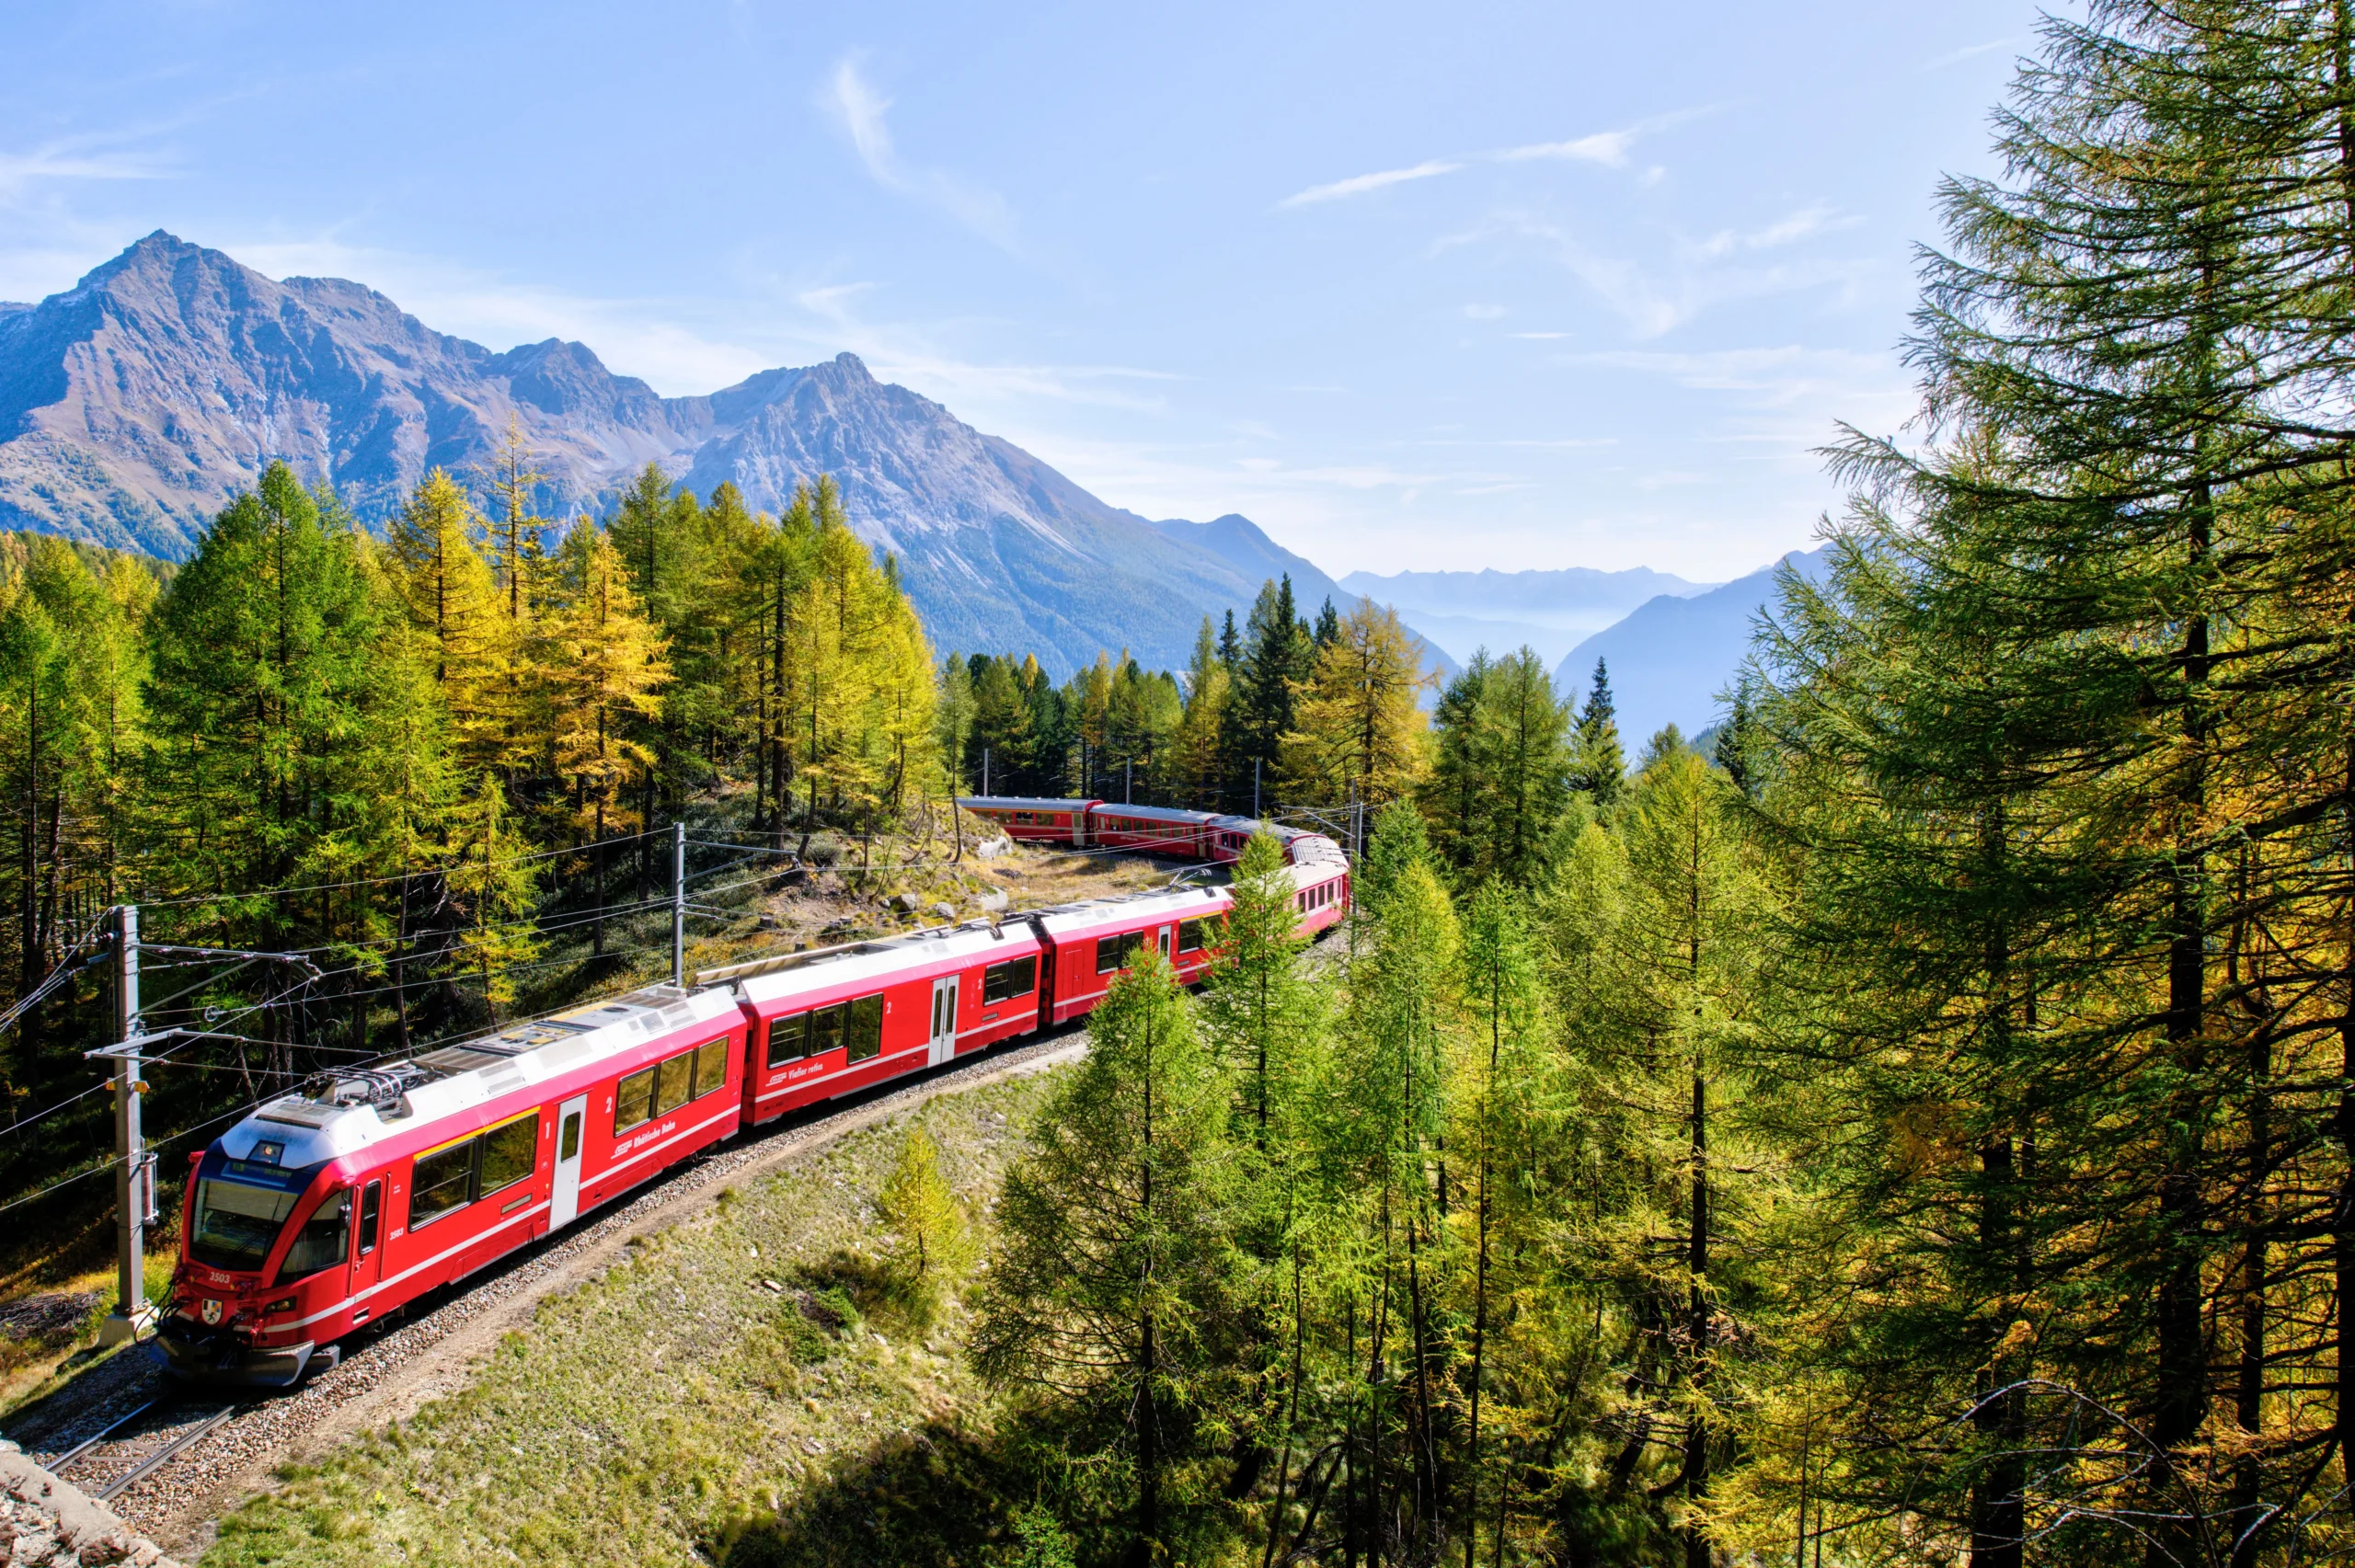 Bernina Express scenic trail: Red train amidst the forest with mountains in the background.